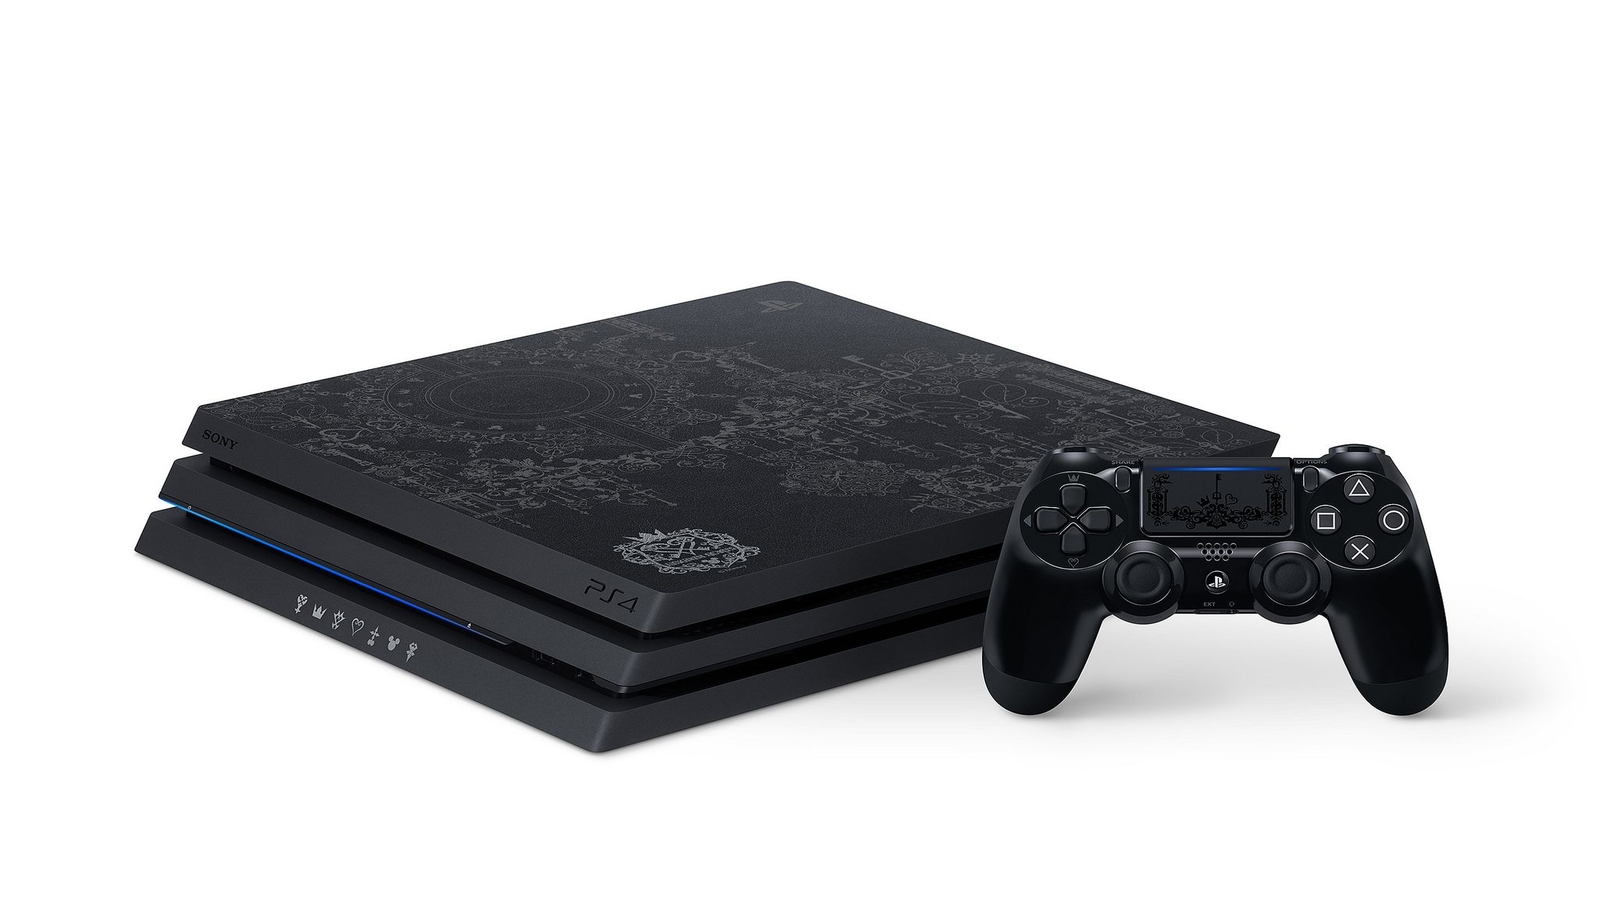 om forladelse i dag hamburger This Kingdom Hearts 3 Limited Edition PS4 Pro is rather pretty | VG247